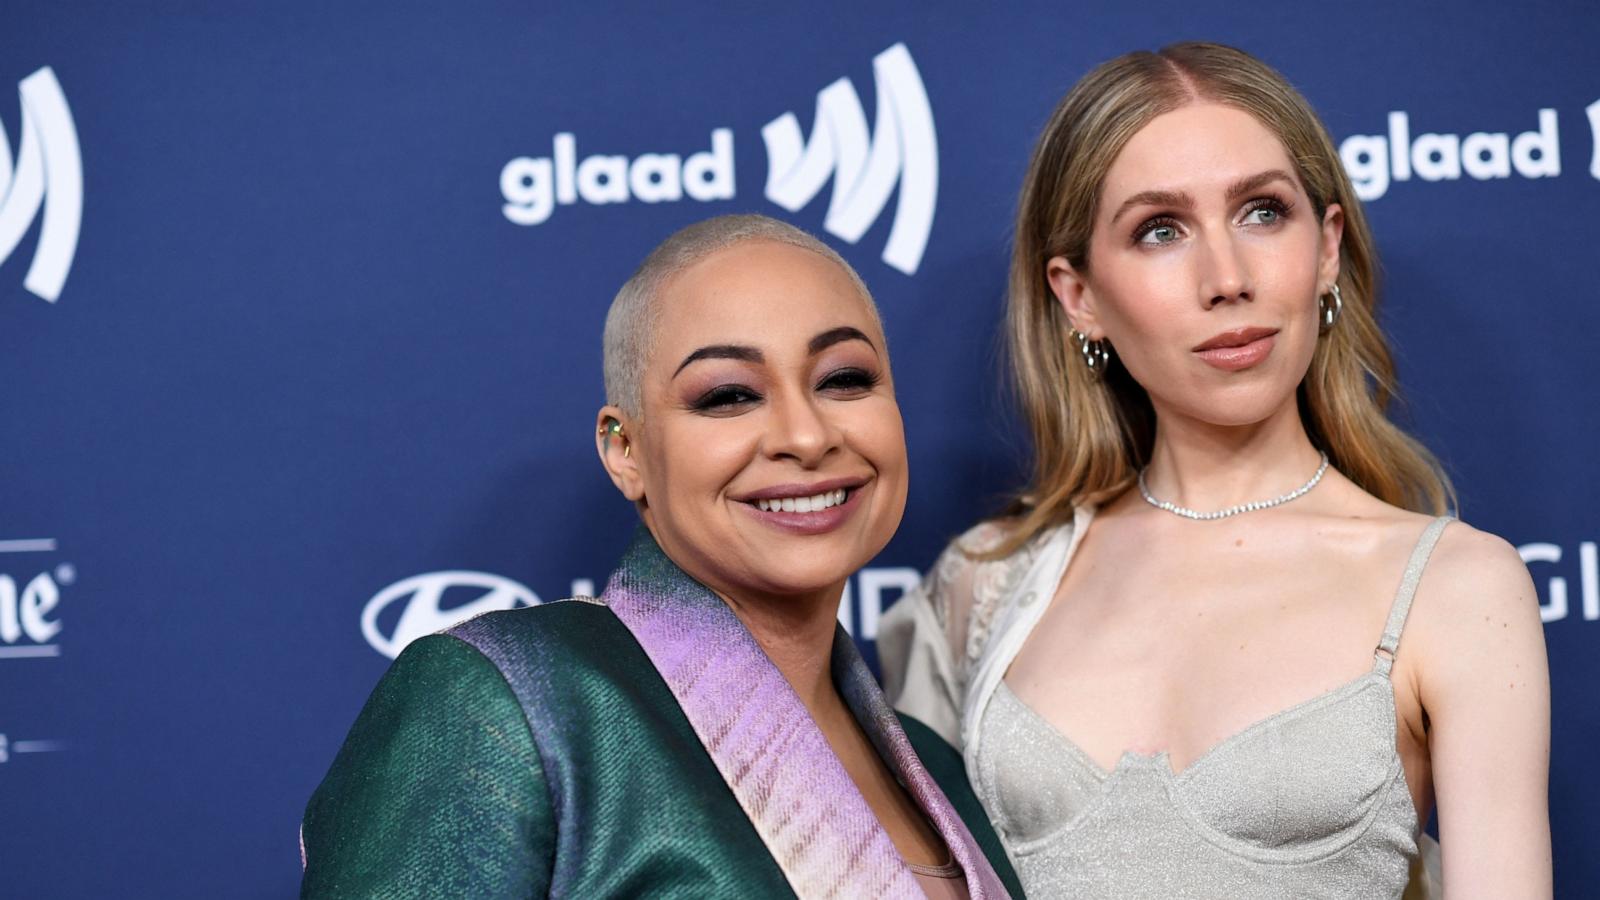 PHOTO: Raven-Symone and her wife Miranda Maday arrive for the 34th annual GLAAD awards at the Beverly Hilton hotel in Beverly Hills, California, on March 30, 2023.